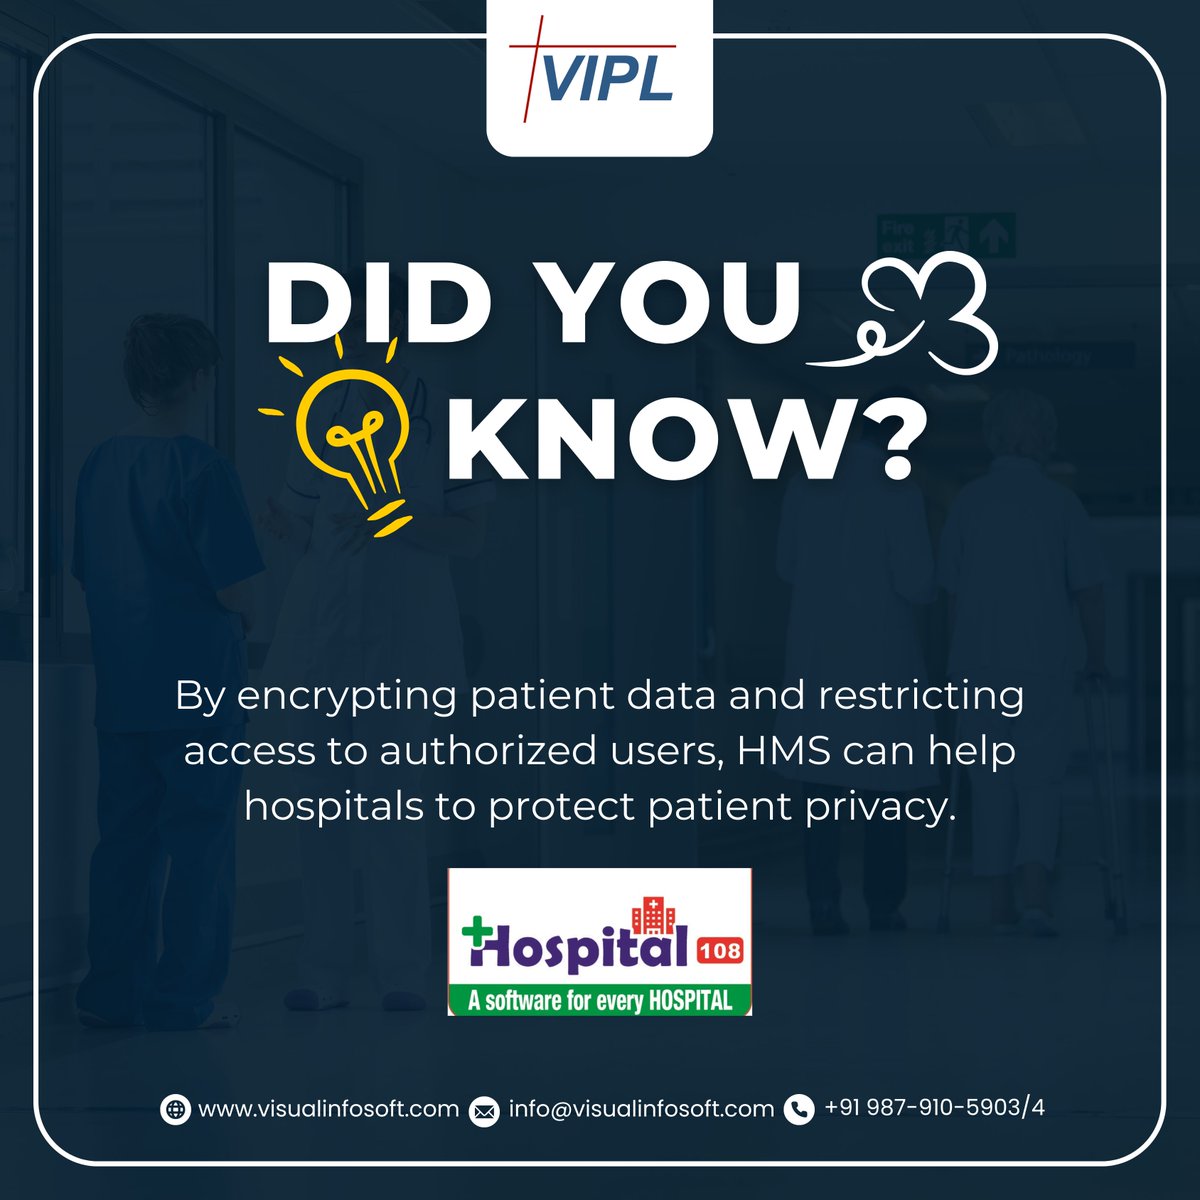 Concerned about hospital data security? Discover how HMS safeguards patient privacy with encryption and access controls. Contact us at +91 987-910-5903/4 or info@visualinfosoft.com. Visit visualinfosoft.com for more info. #PatientPrivacy #DataSecurity #HealthcareIT #HMS